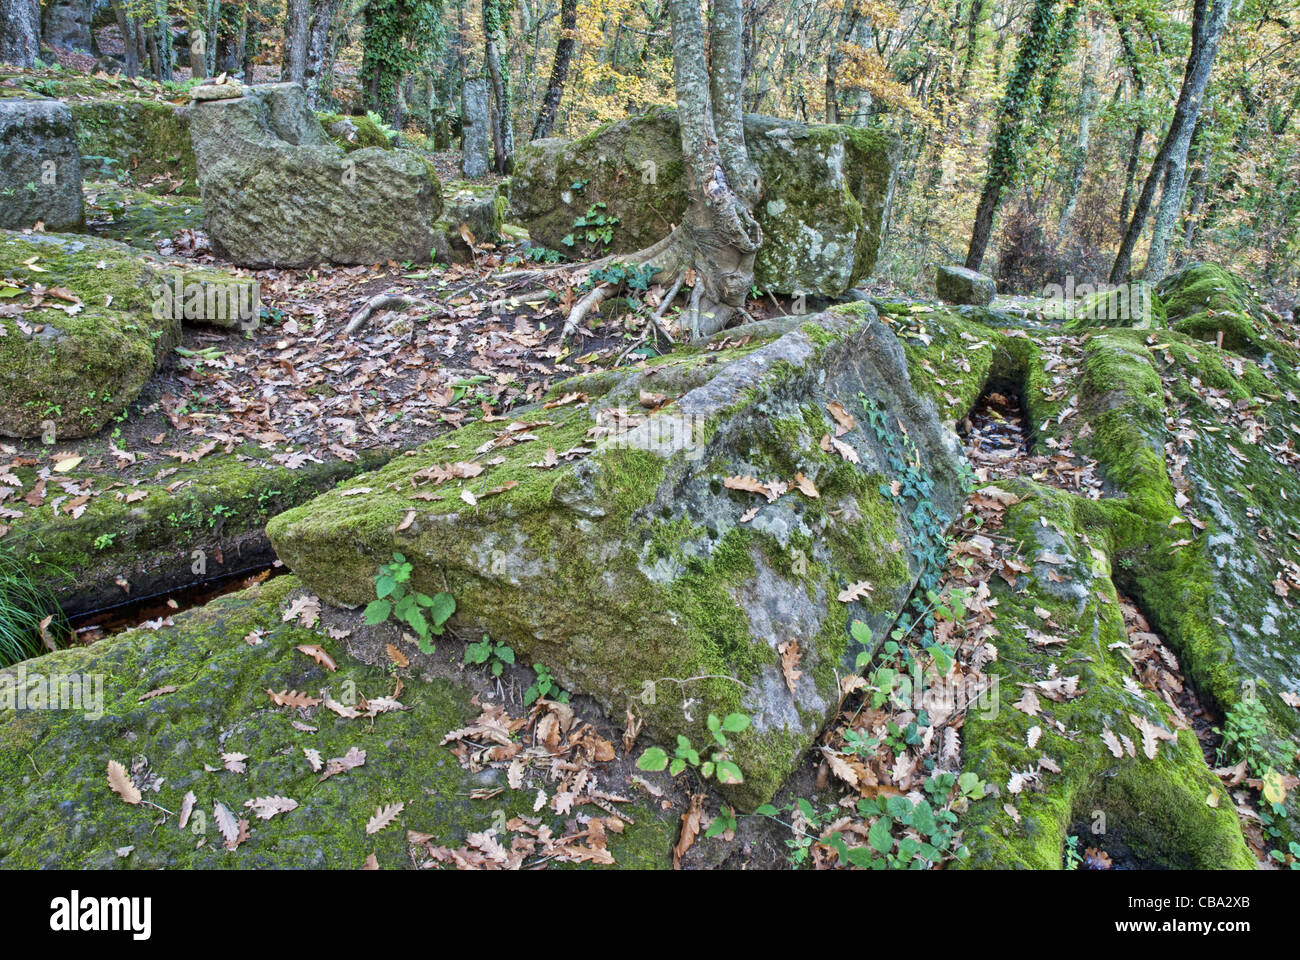 The remains of the Early Medieval village of St. Cecilia, province of Viterbo, Italy. Stock Photo